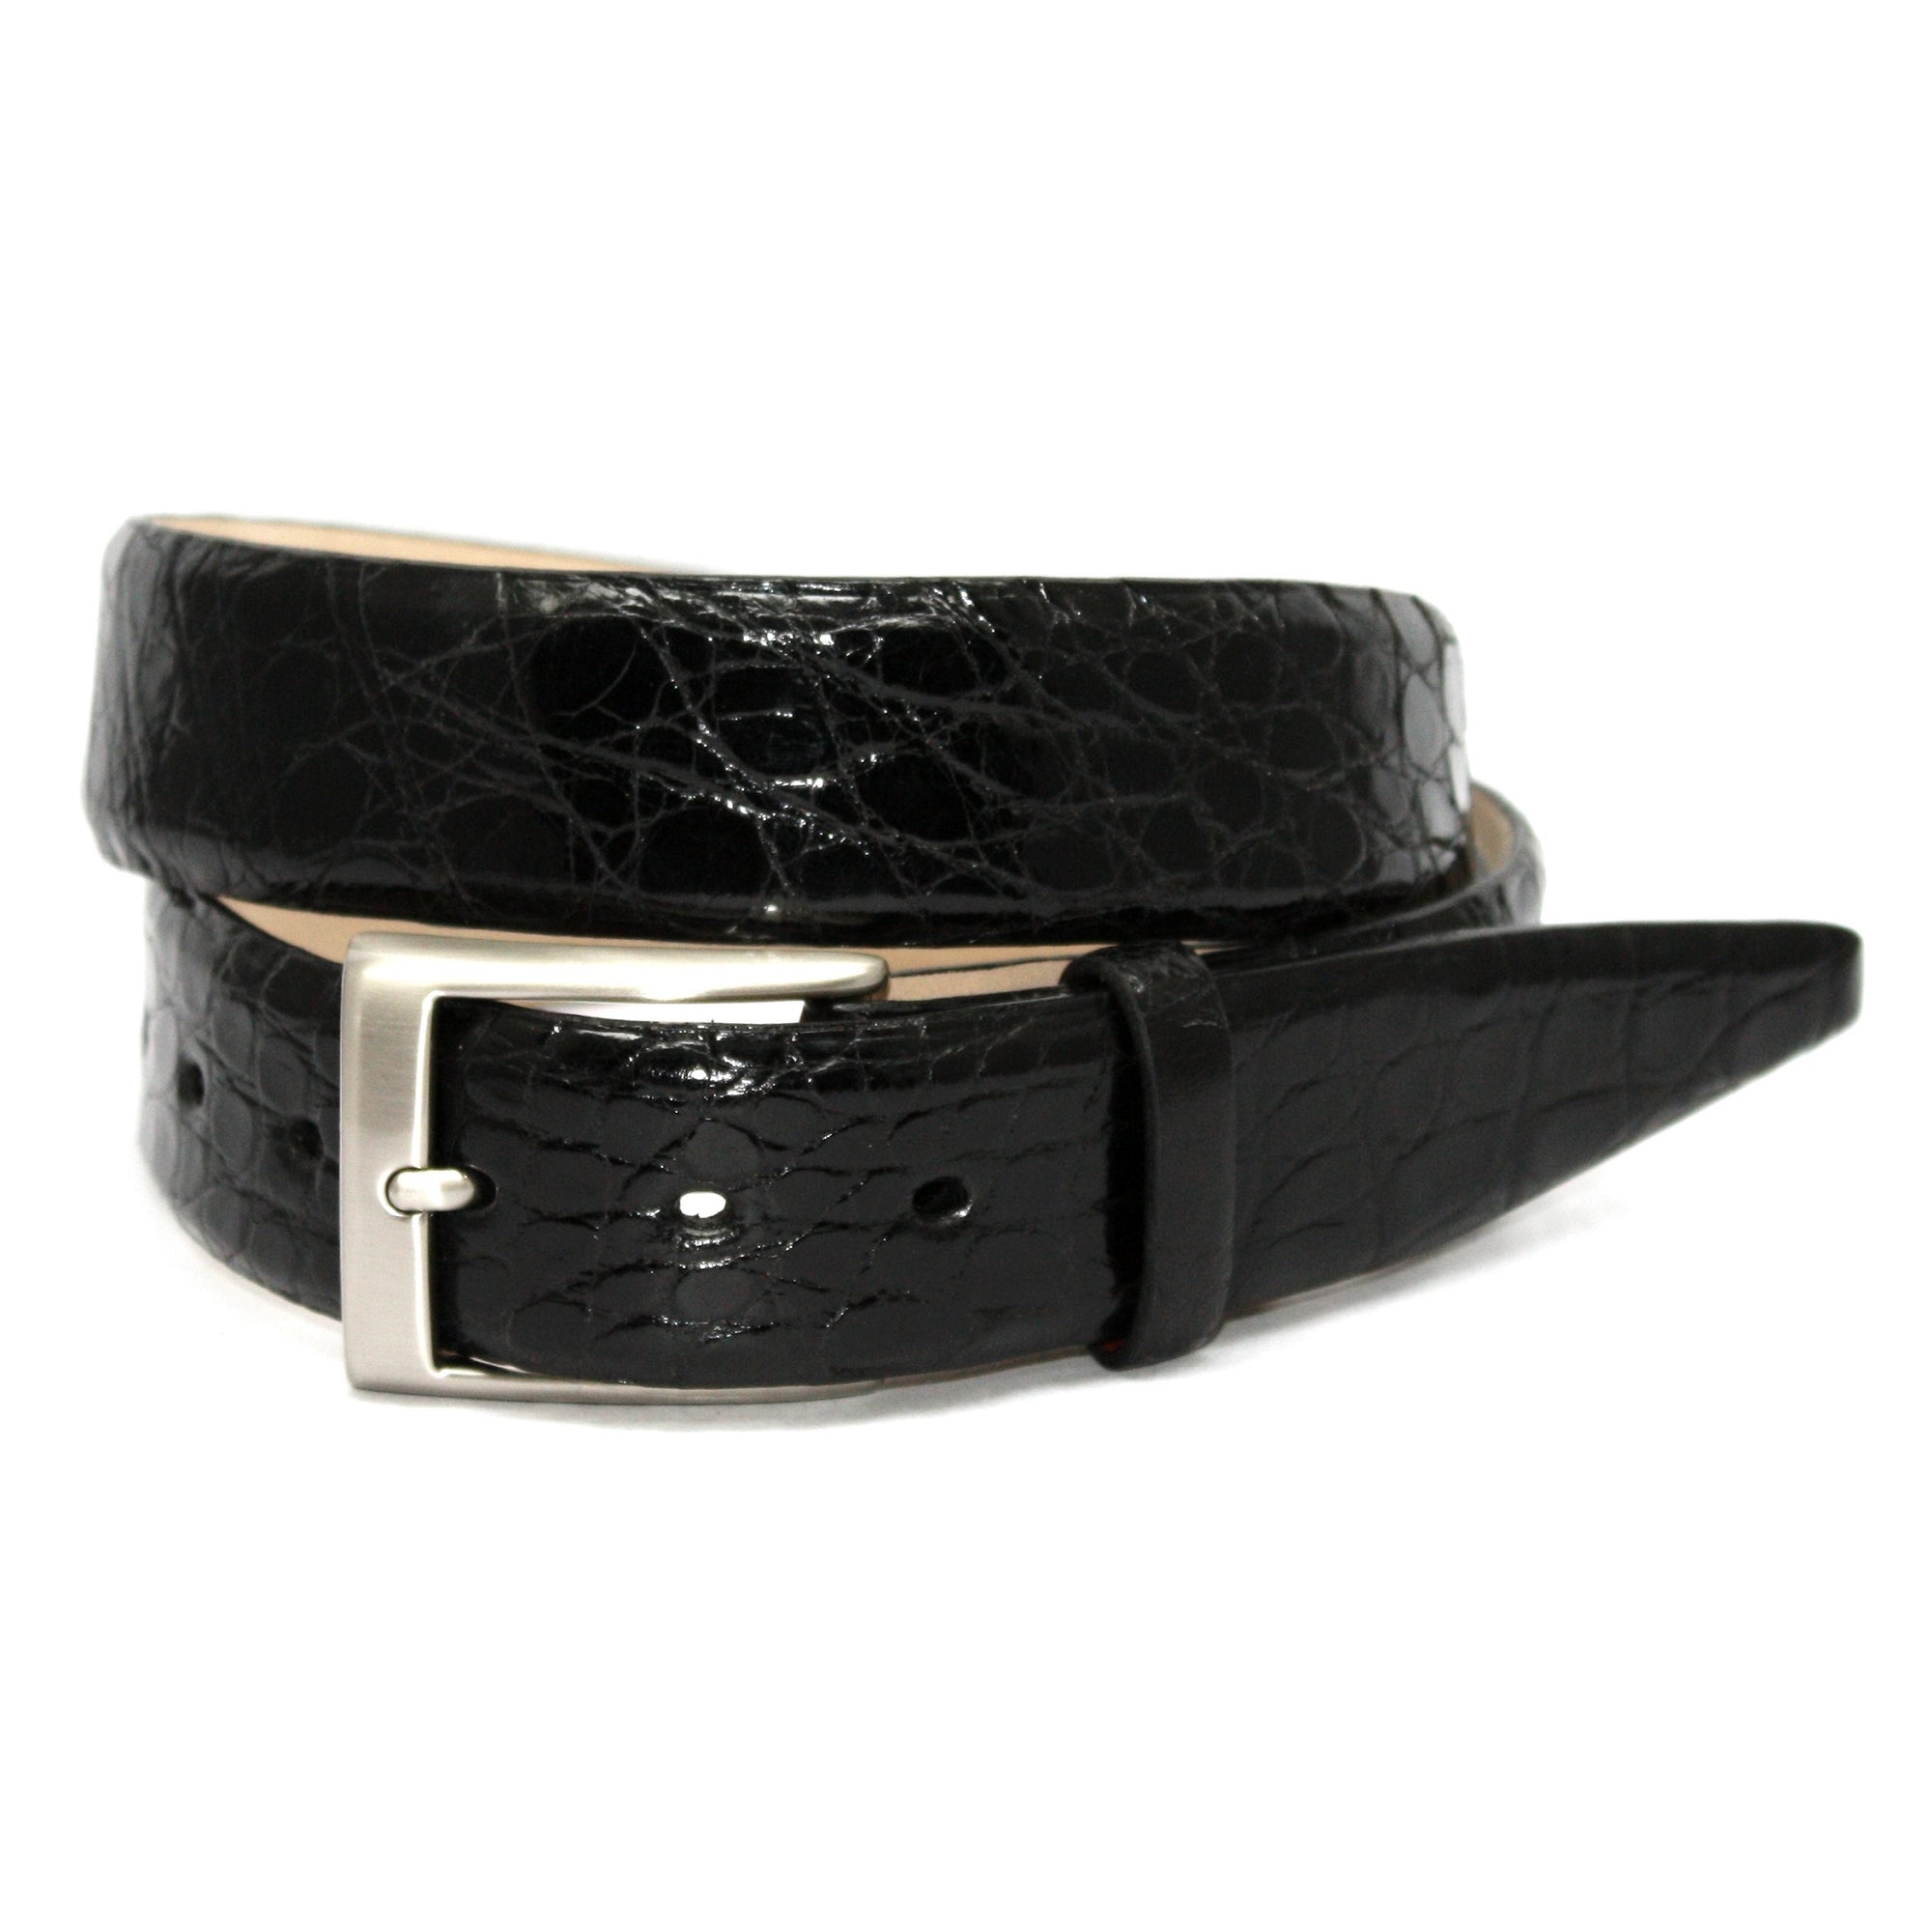 Glazed South American Caiman Belt in Black by Torino Leather